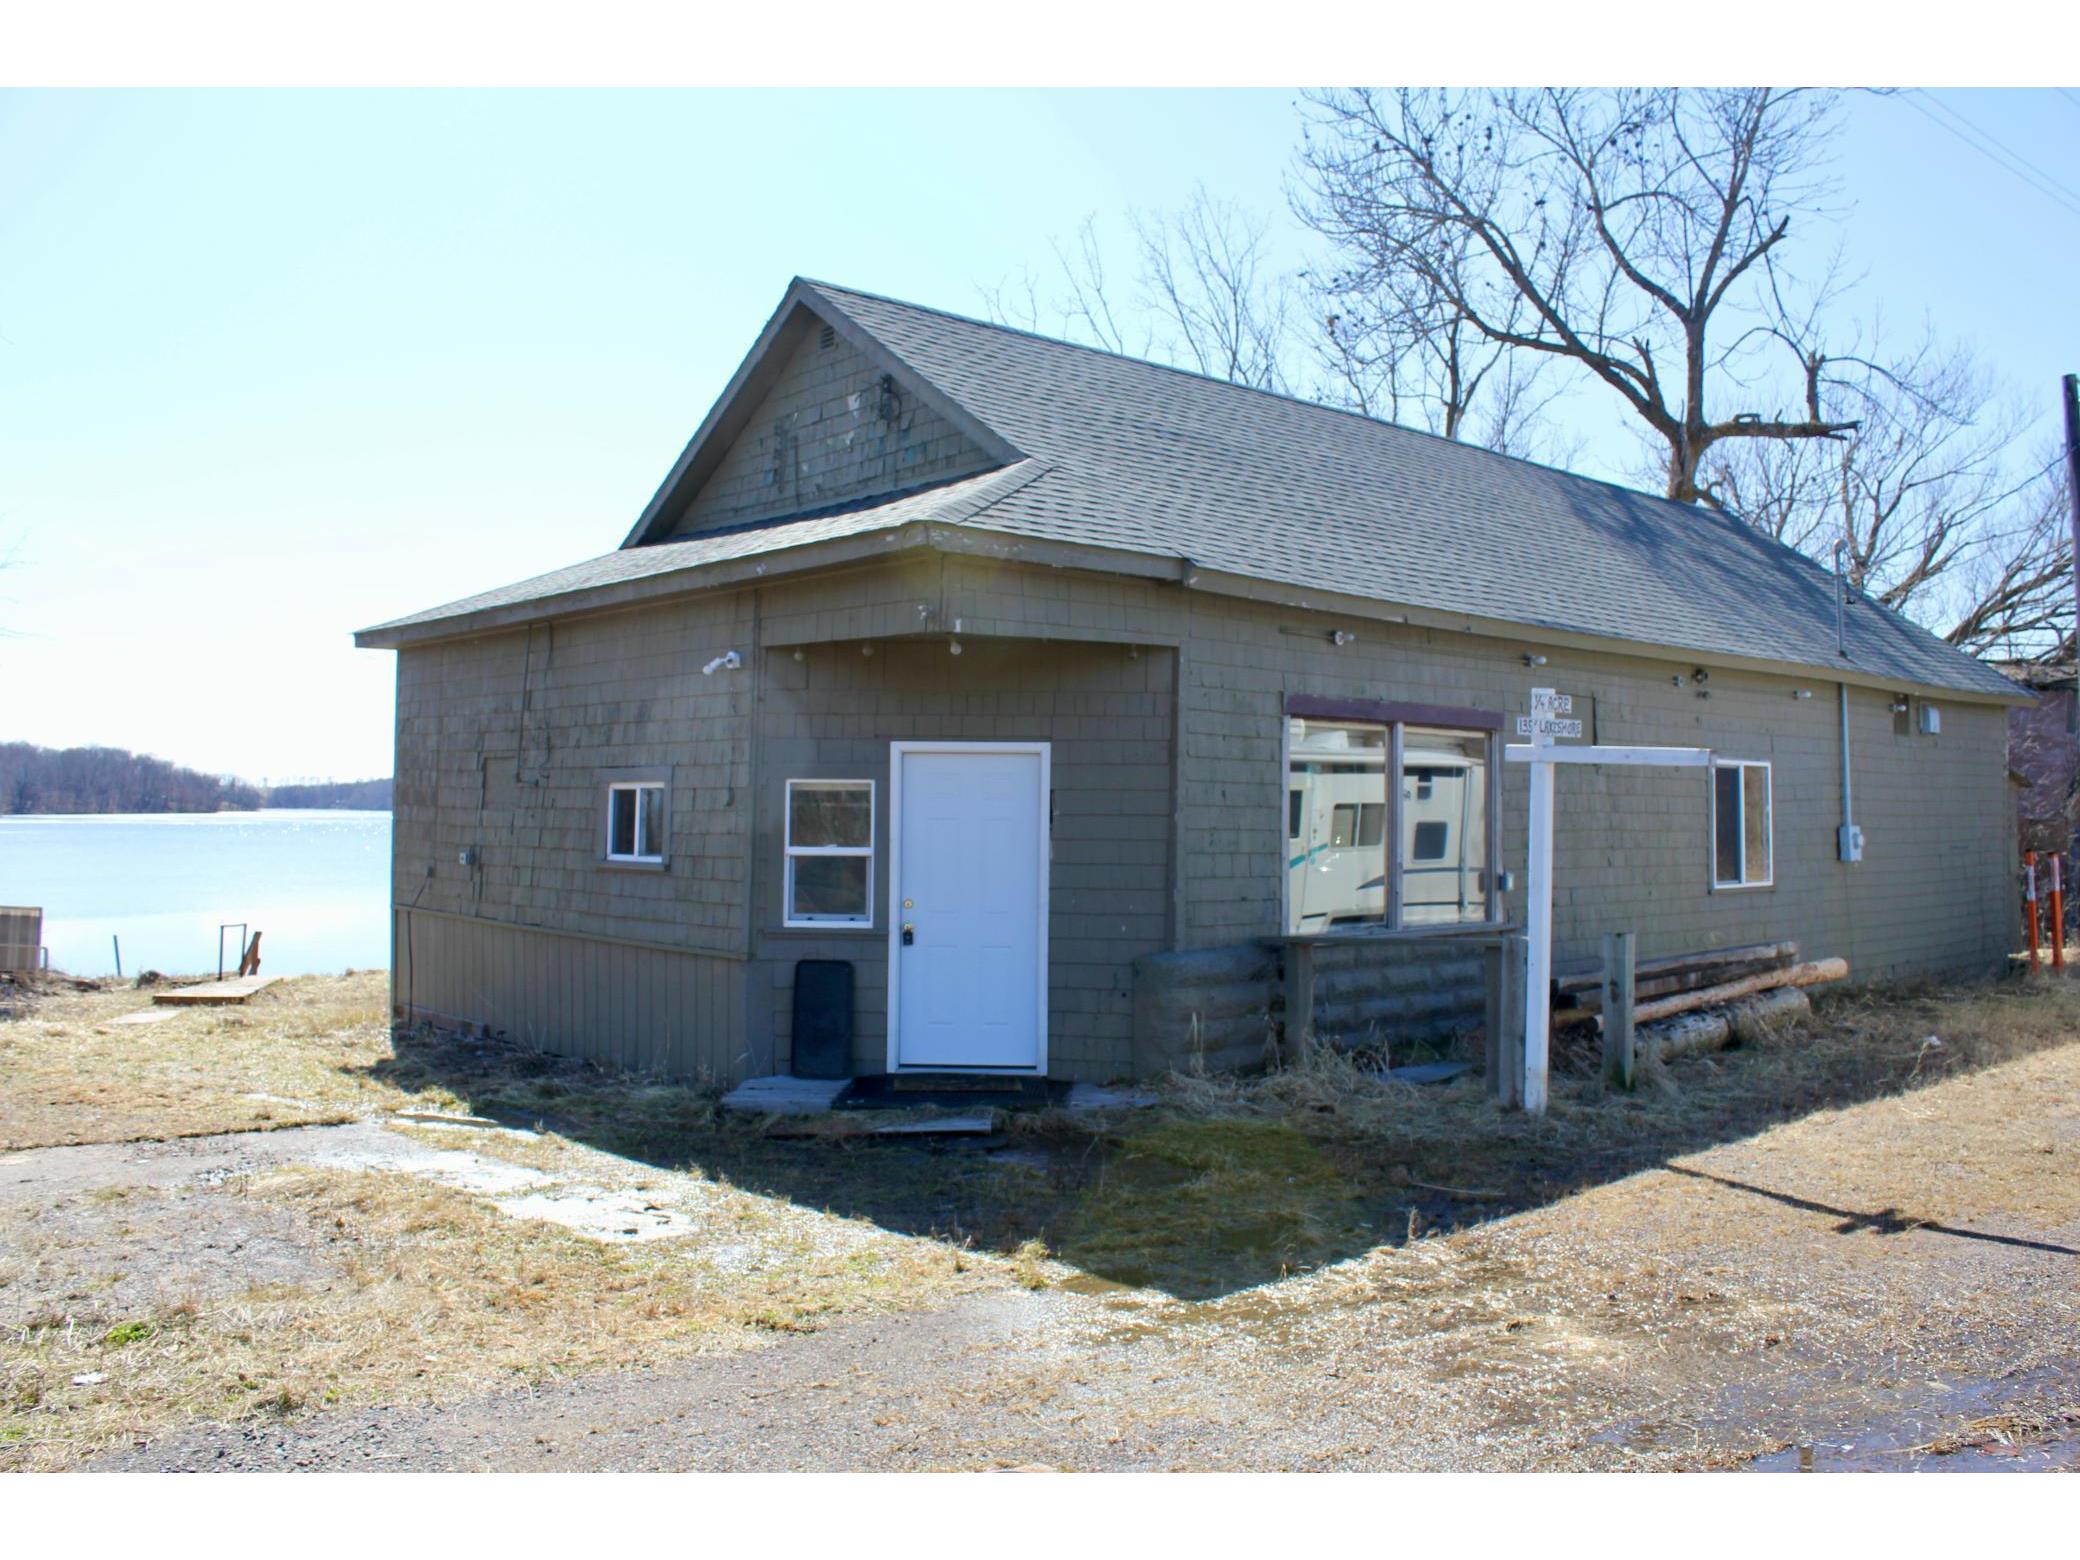 2132 295th Avenue Luck WI 54853 - Long Trade 5730209 image1